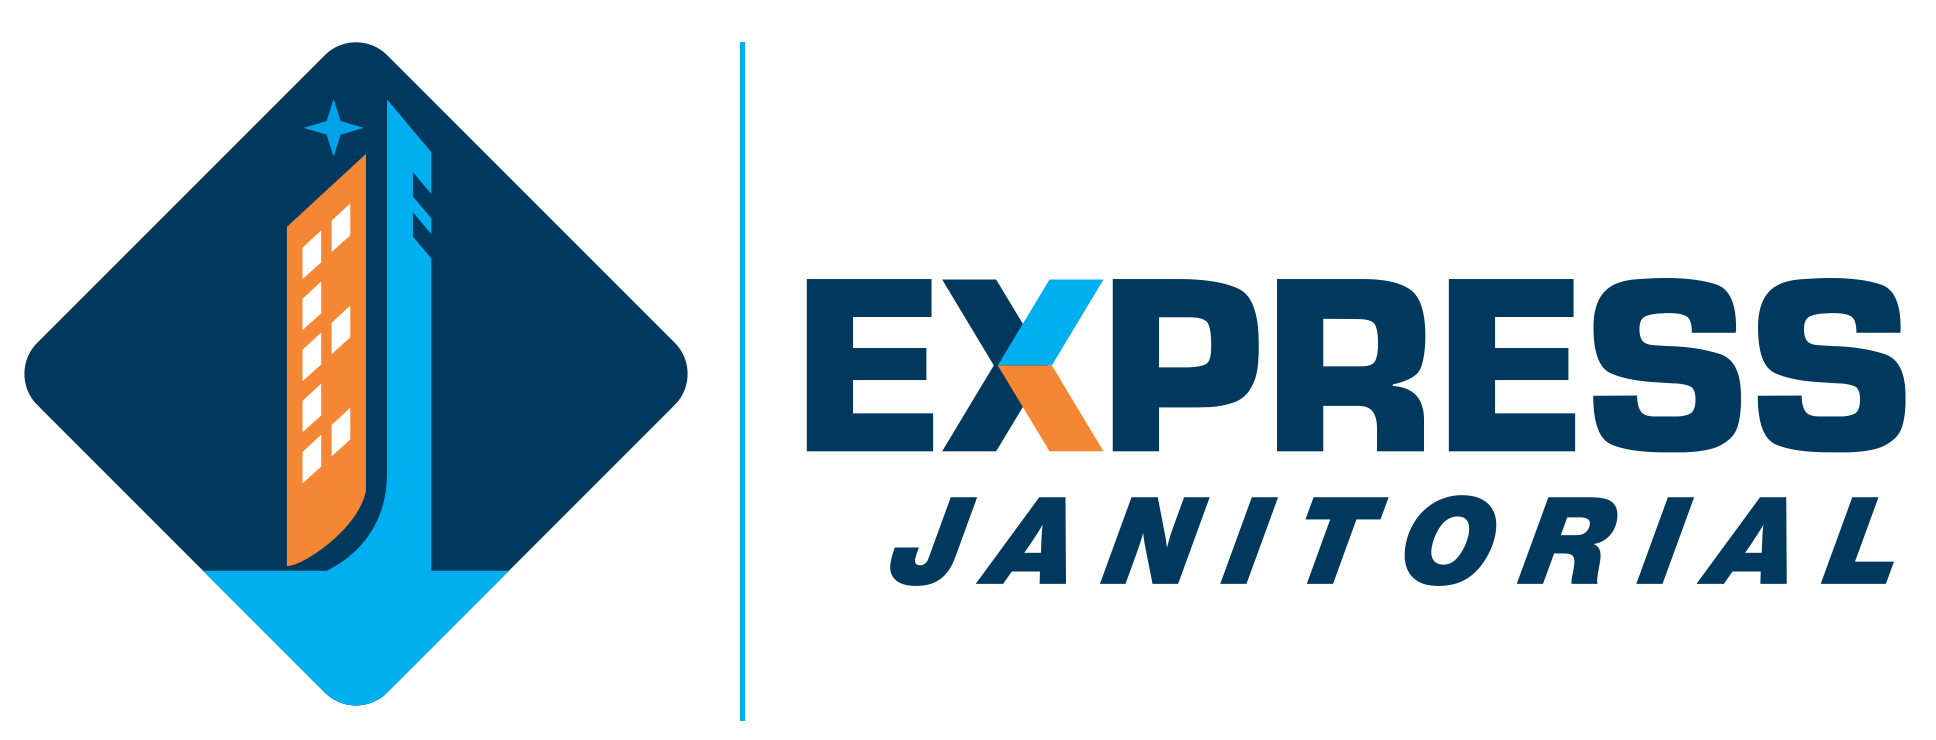 Express Janitorial Services Logo